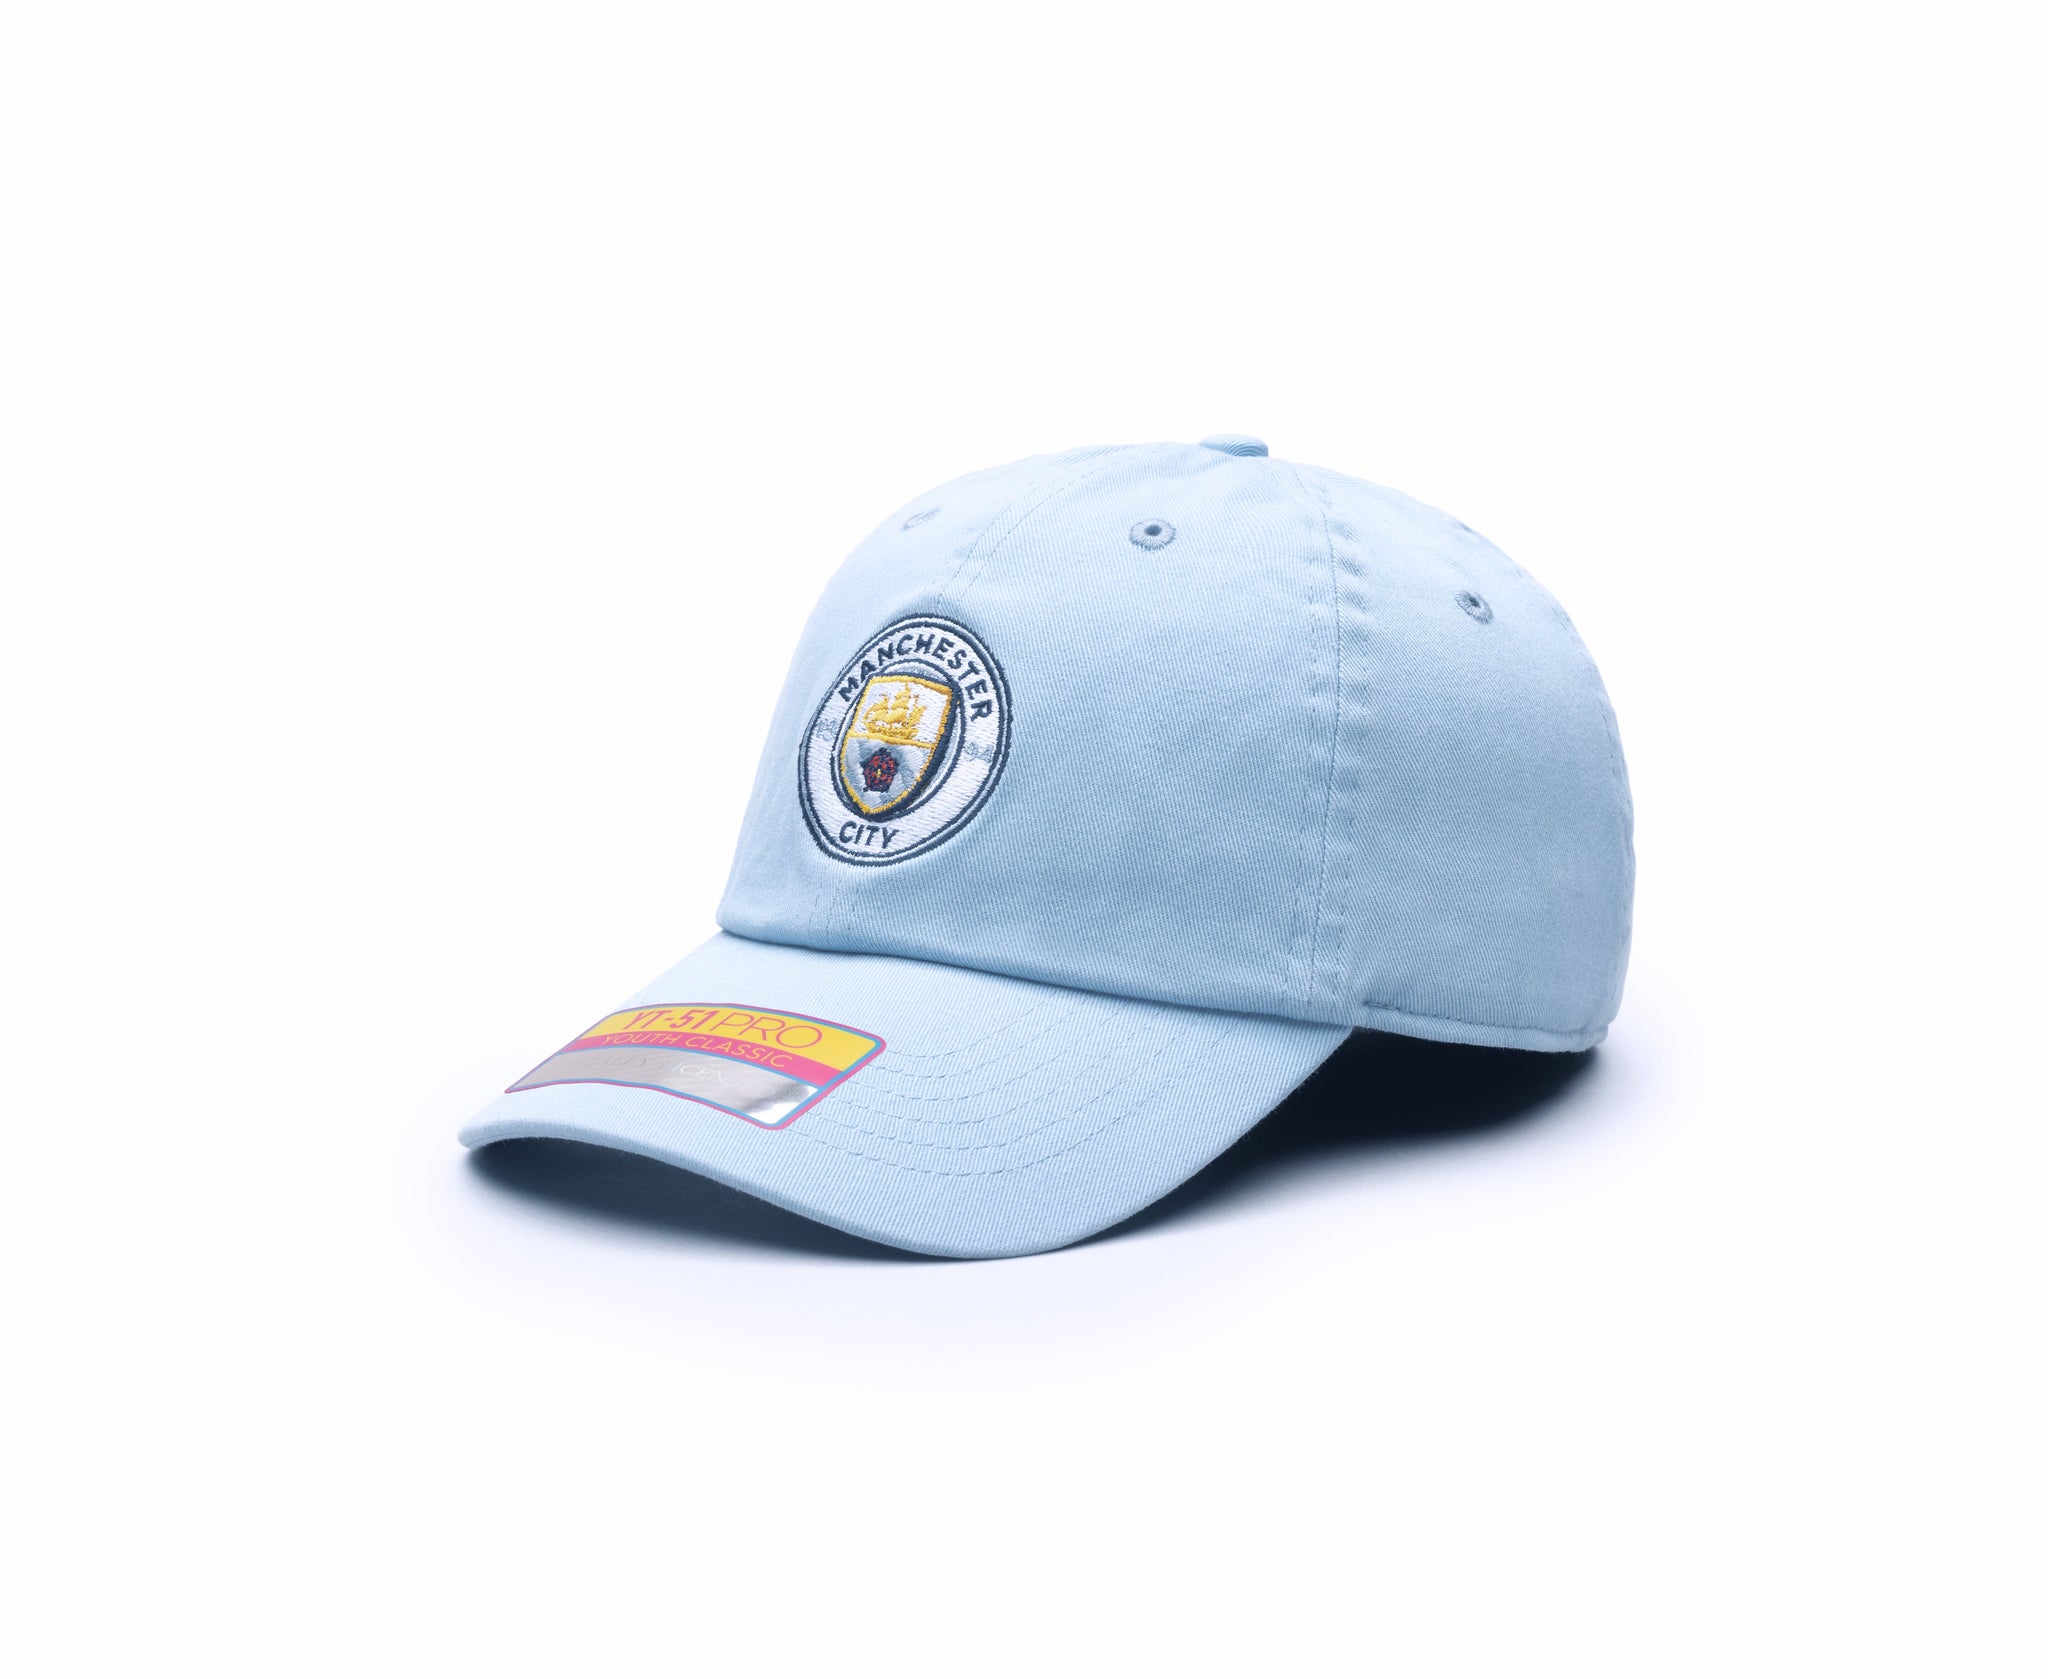 Manchester City Bamo Kids Classic hat with low, unconstructed crown, curved peak, and flip buckle closure, in Light Blue